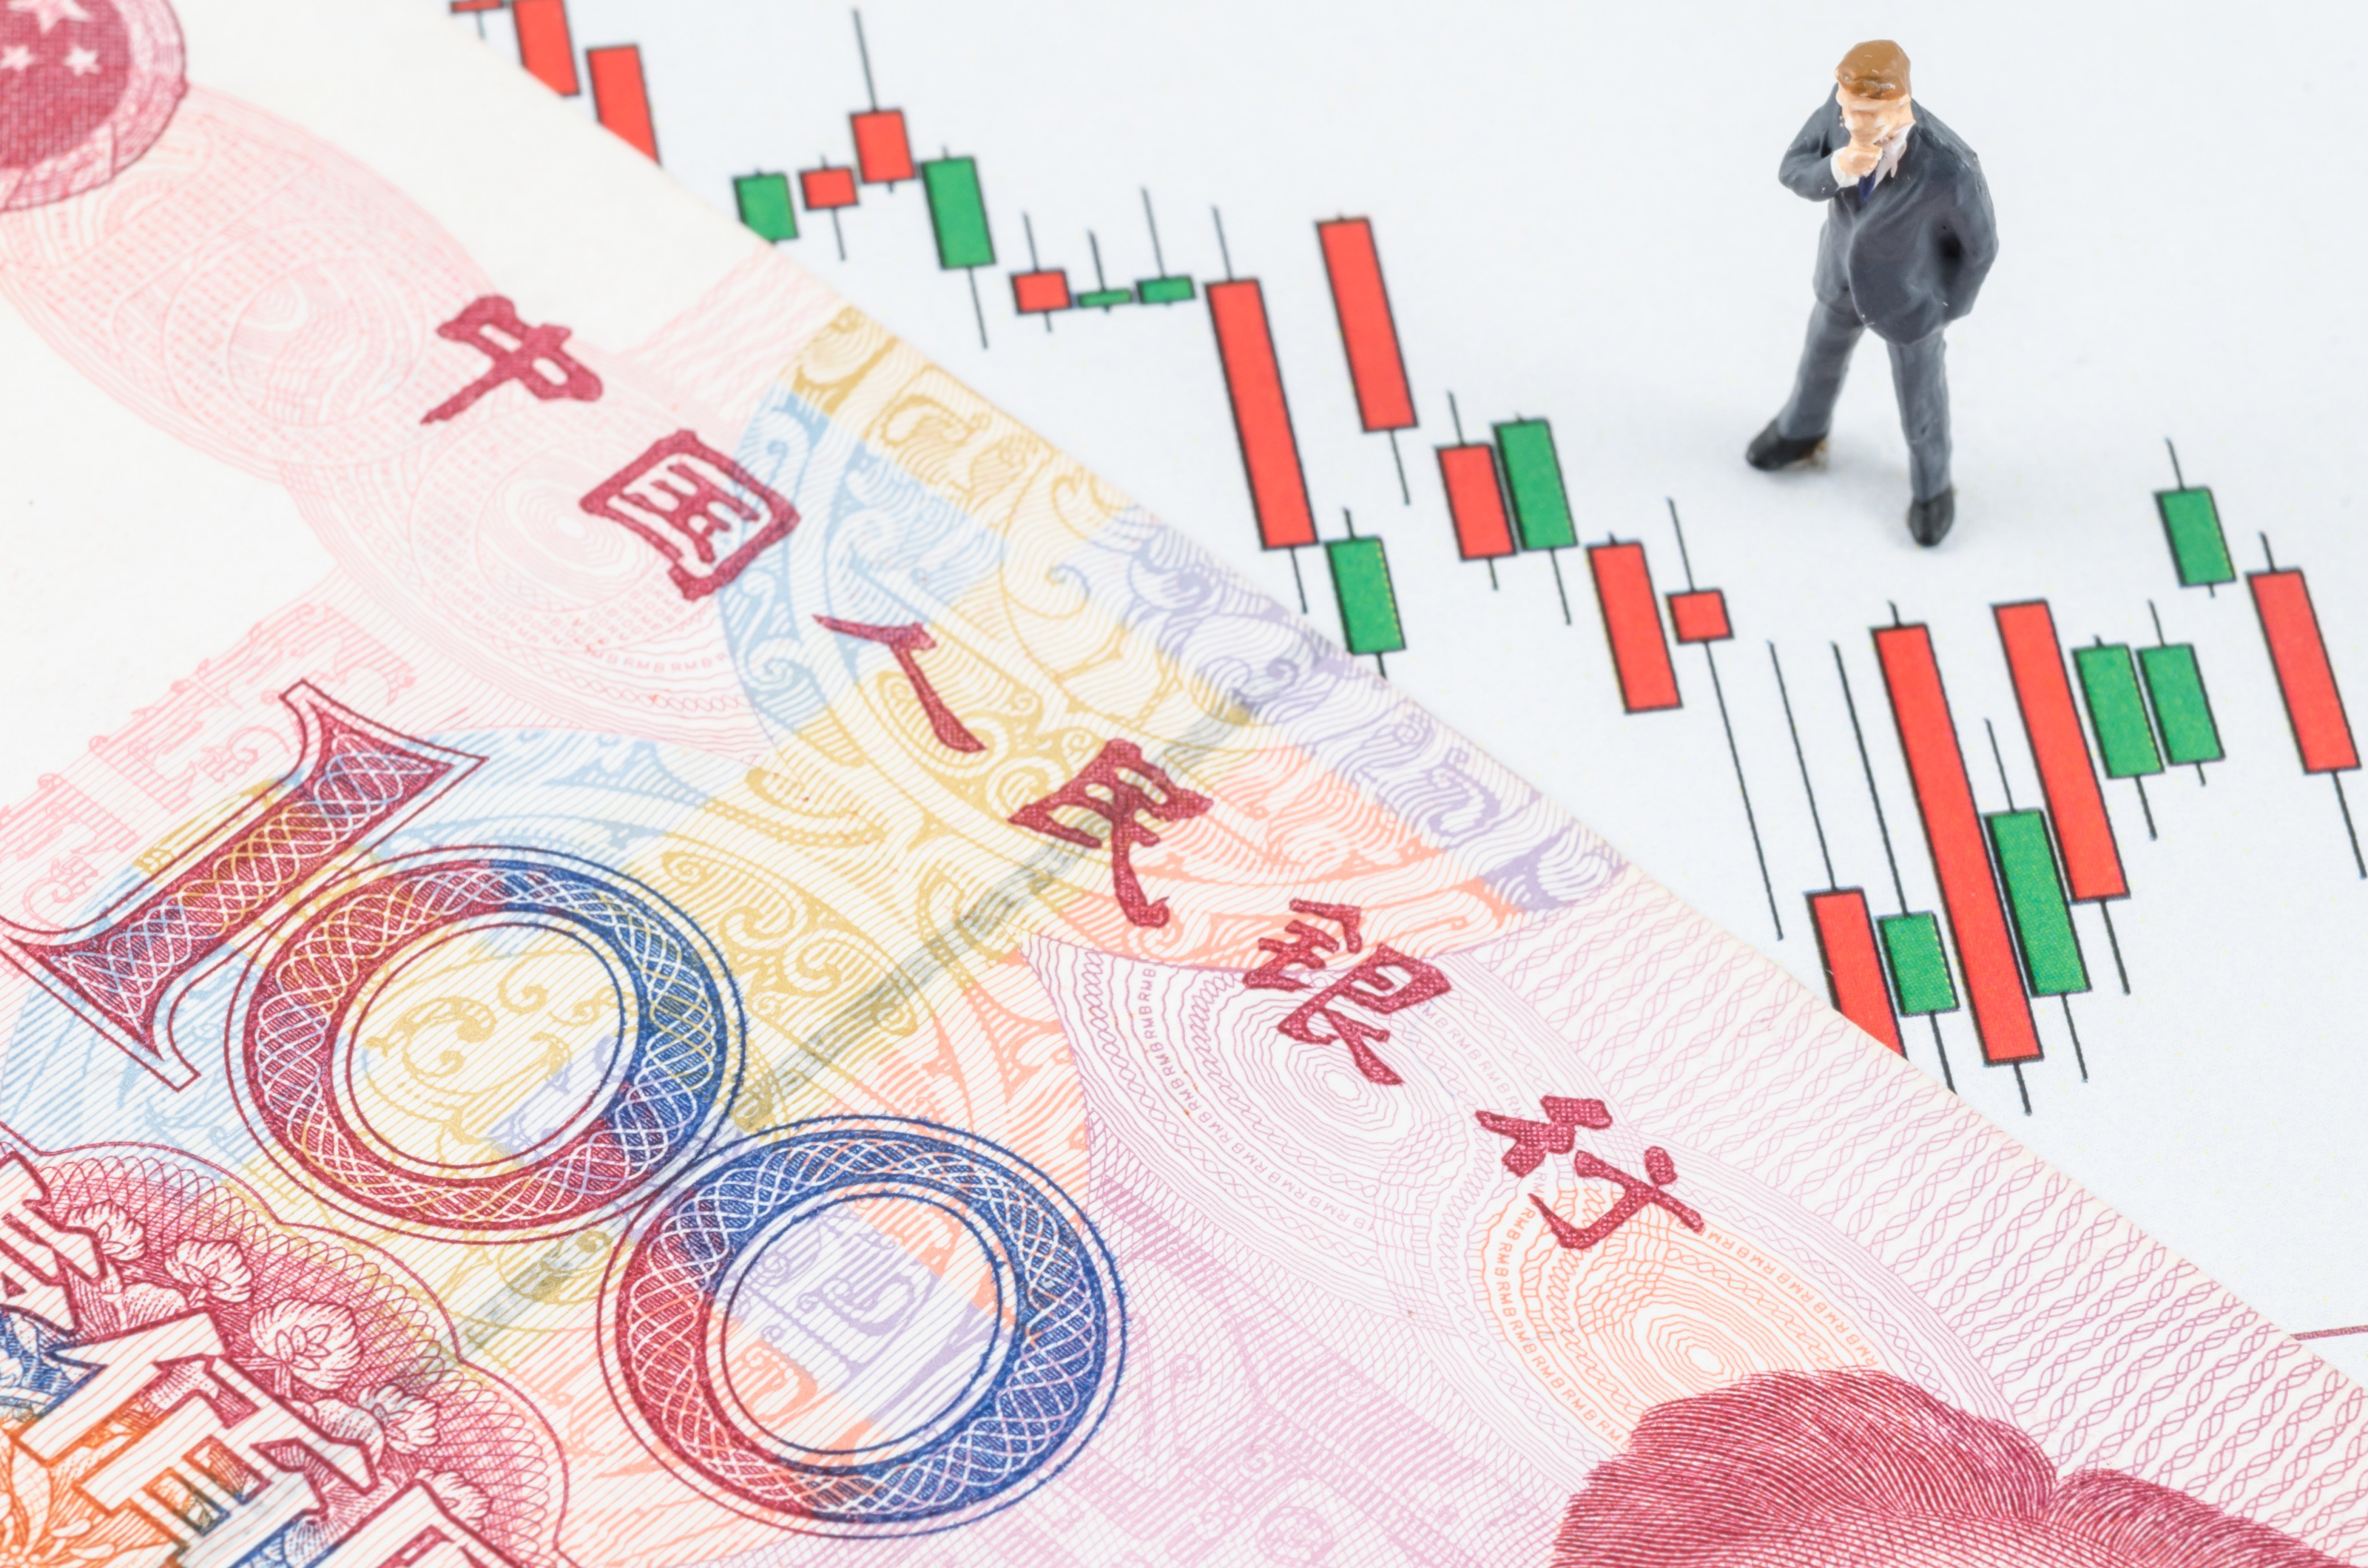 Over the past several years, Chinese authorities have been using the same phrase – “stable with good momentum” – to describe the country’s economic performance. Image: Shutterstock